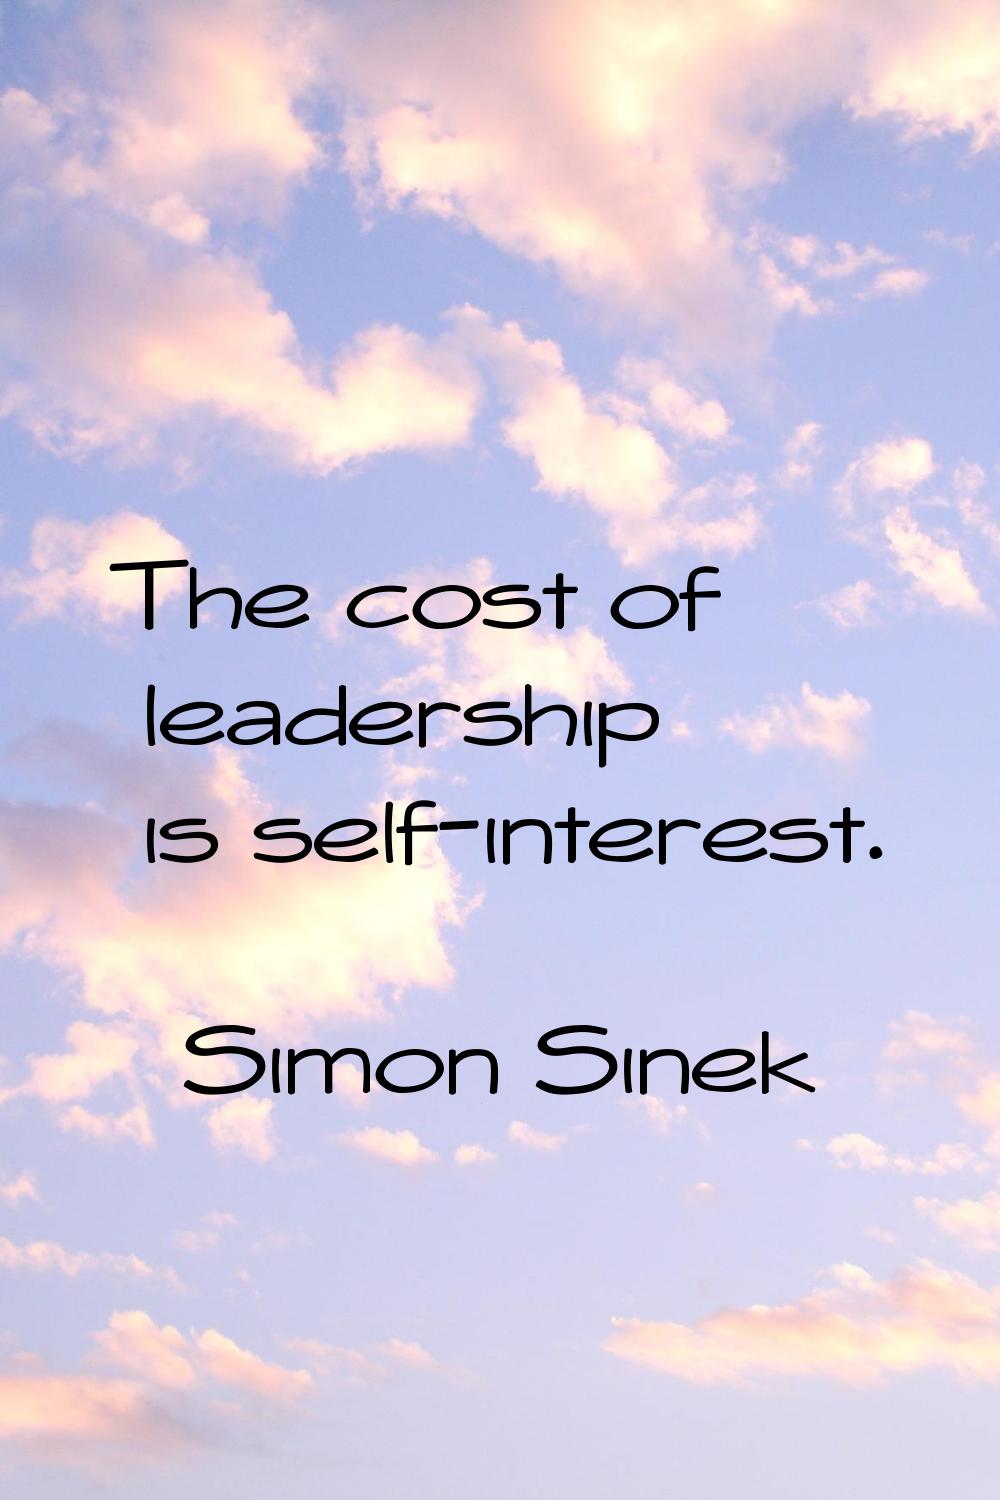 The cost of leadership is self-interest.